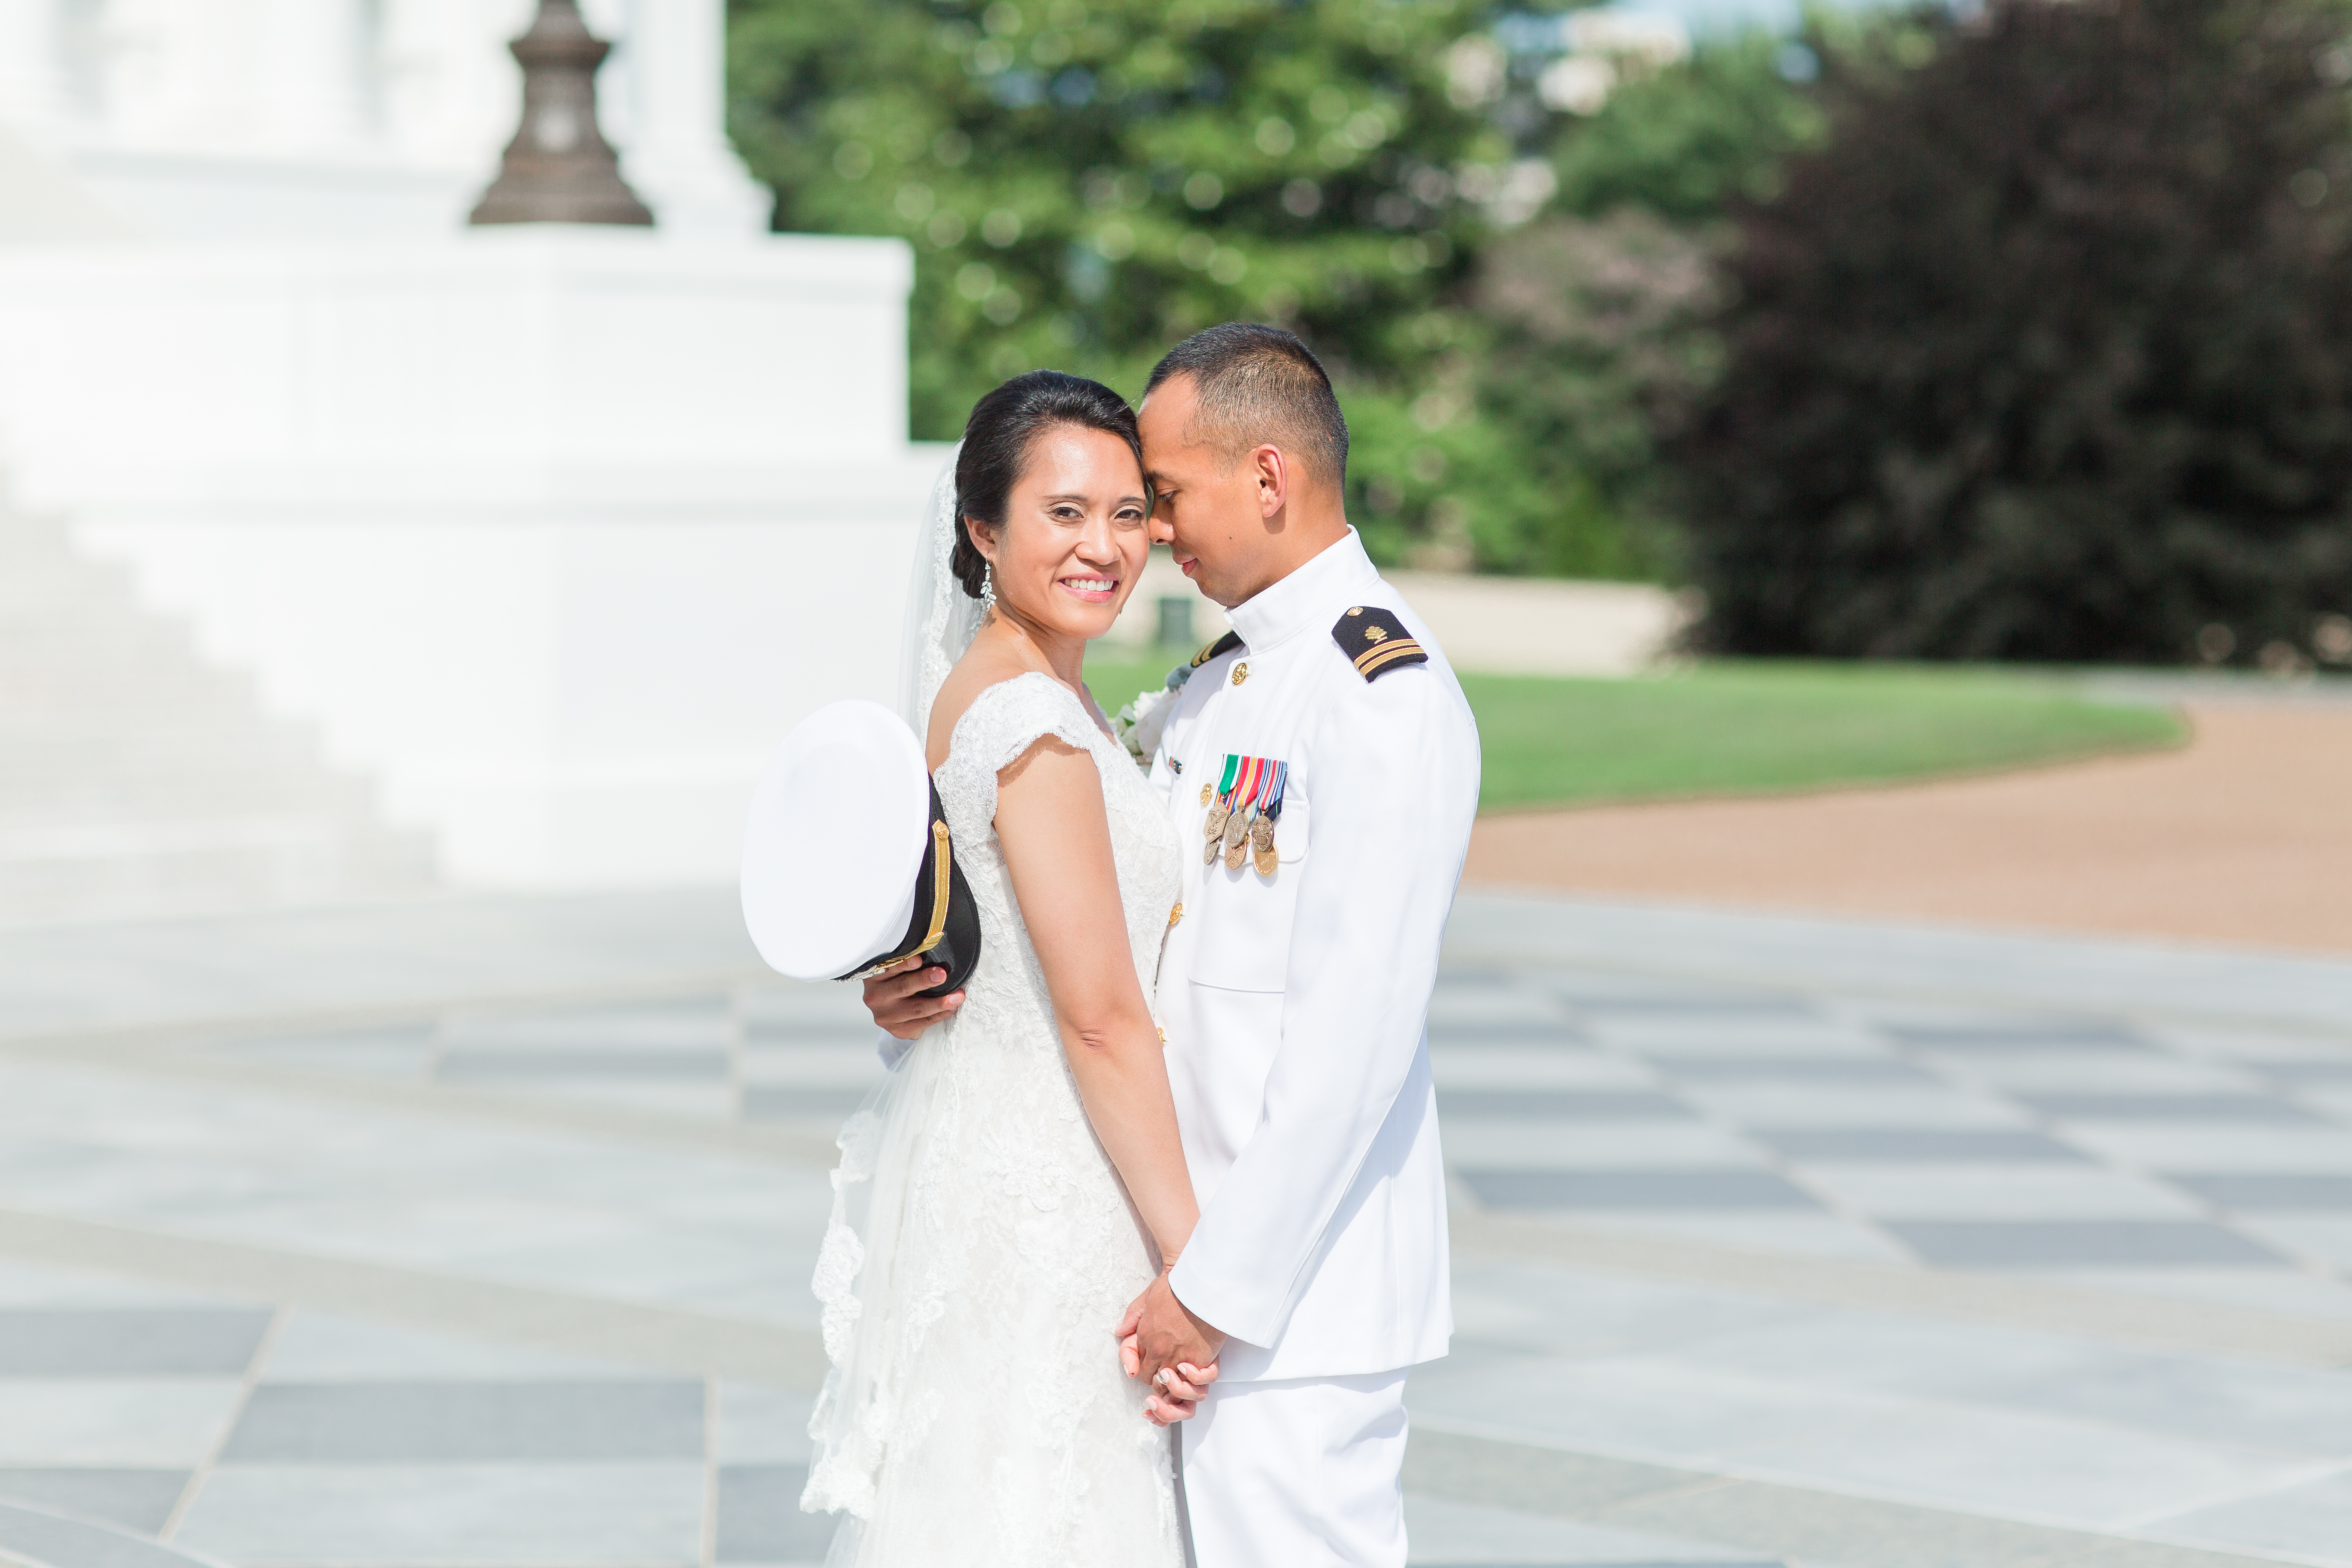 bride and groom portraits at the virginia state capital building along the stairs and front of the building